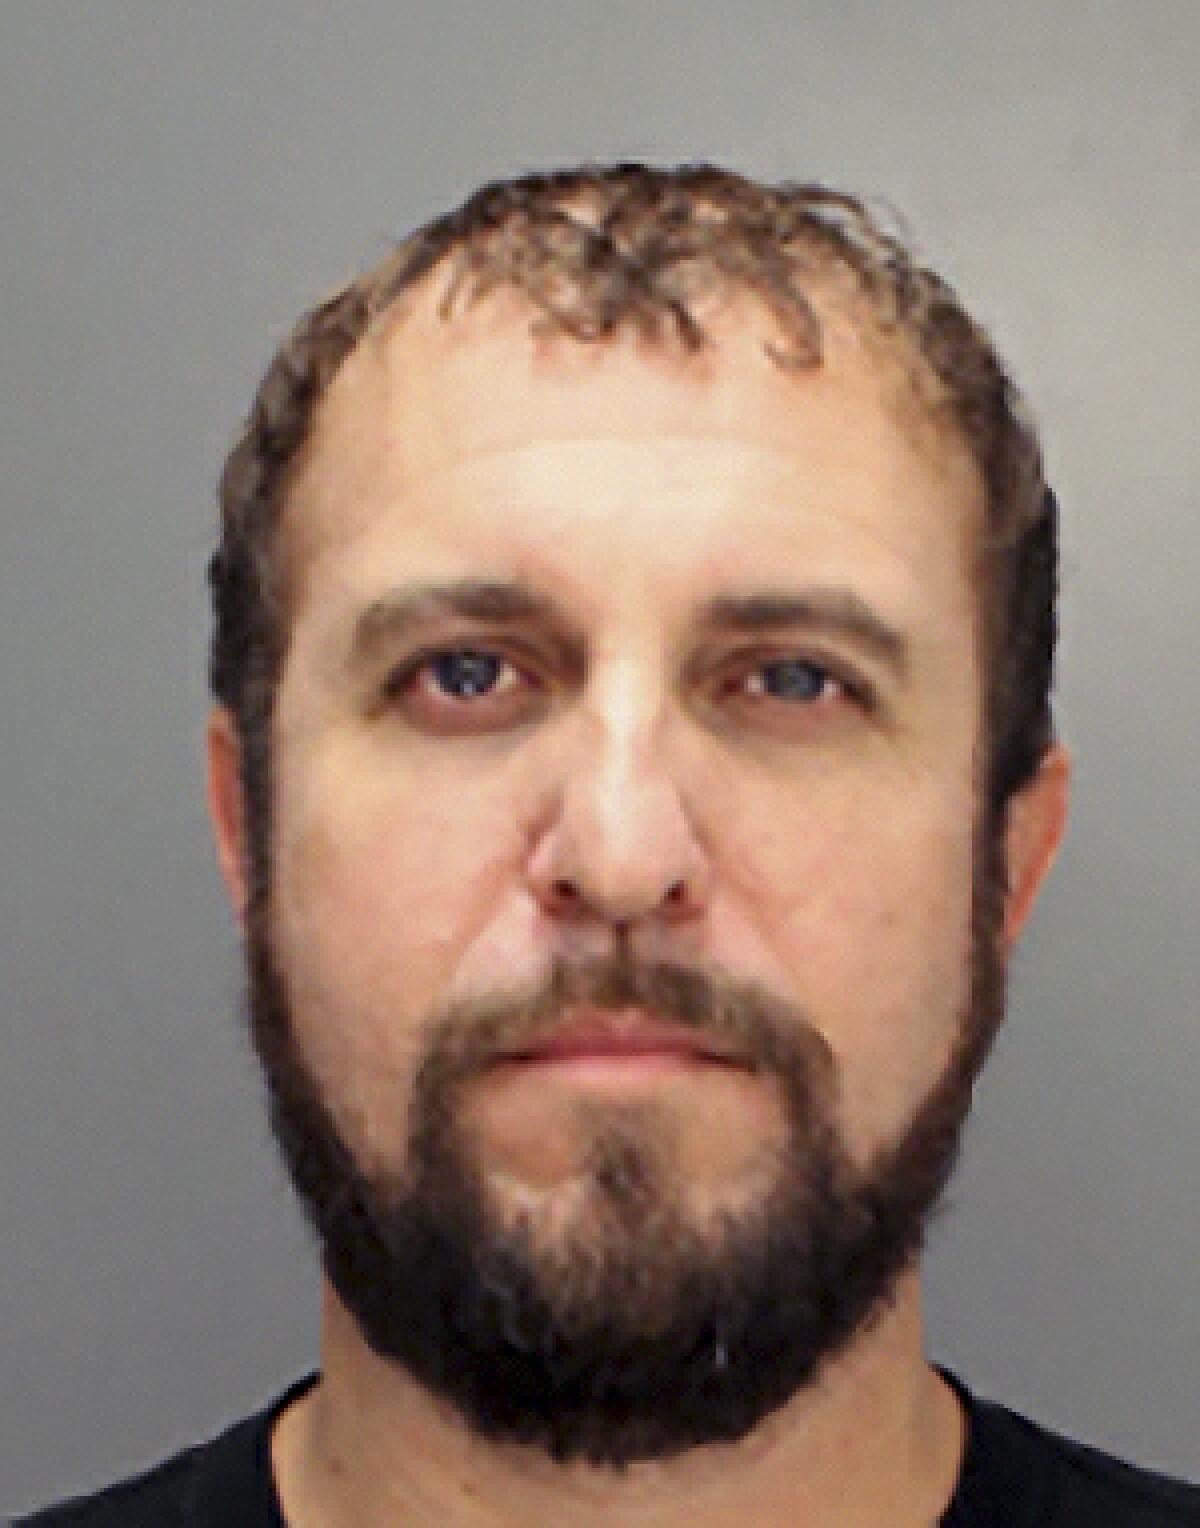 FILE - This image provided by the Philadelphia Police Department shows Joshua Macias. Macias and Antonio LaMotta, two supporters of former President Donald Trump arrested after driving a Hummer with guns and ammunition to a Philadelphia site where votes were being counted in November 2020, were convicted of weapons charges Wednesday, Oct. 12, 2022, but acquitted of election interference. (Philadelphia Police Department via AP, File)